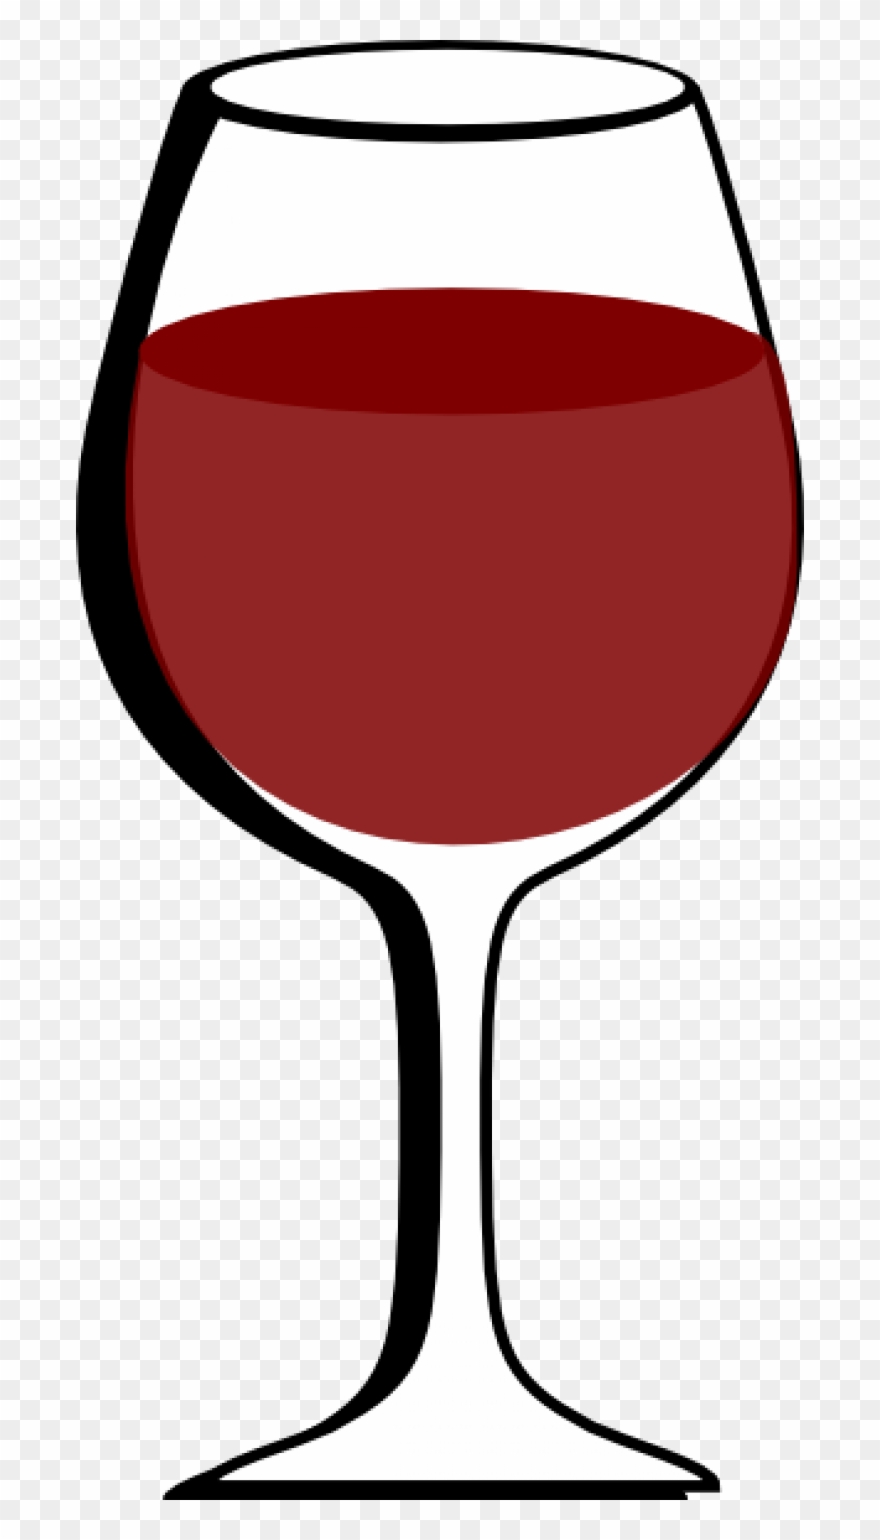 red wine glass - Clip Art Library